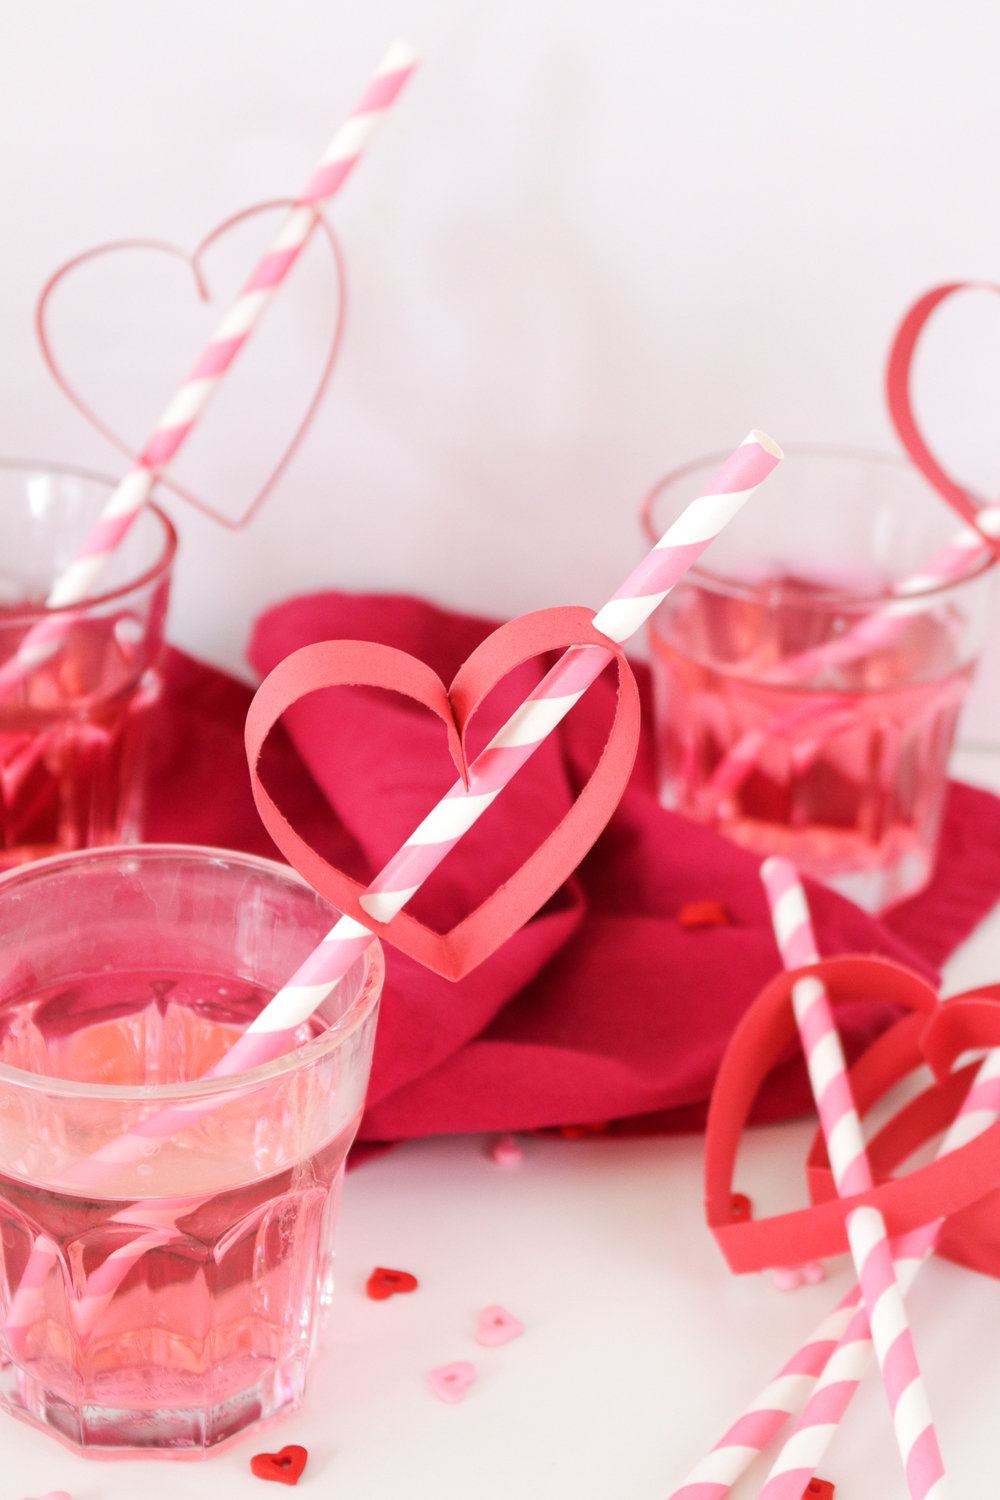 https://www.clubcrafted.com/wp-content/uploads/2017/01/valentines-day-diy-paper-heart-straws-7.jpg